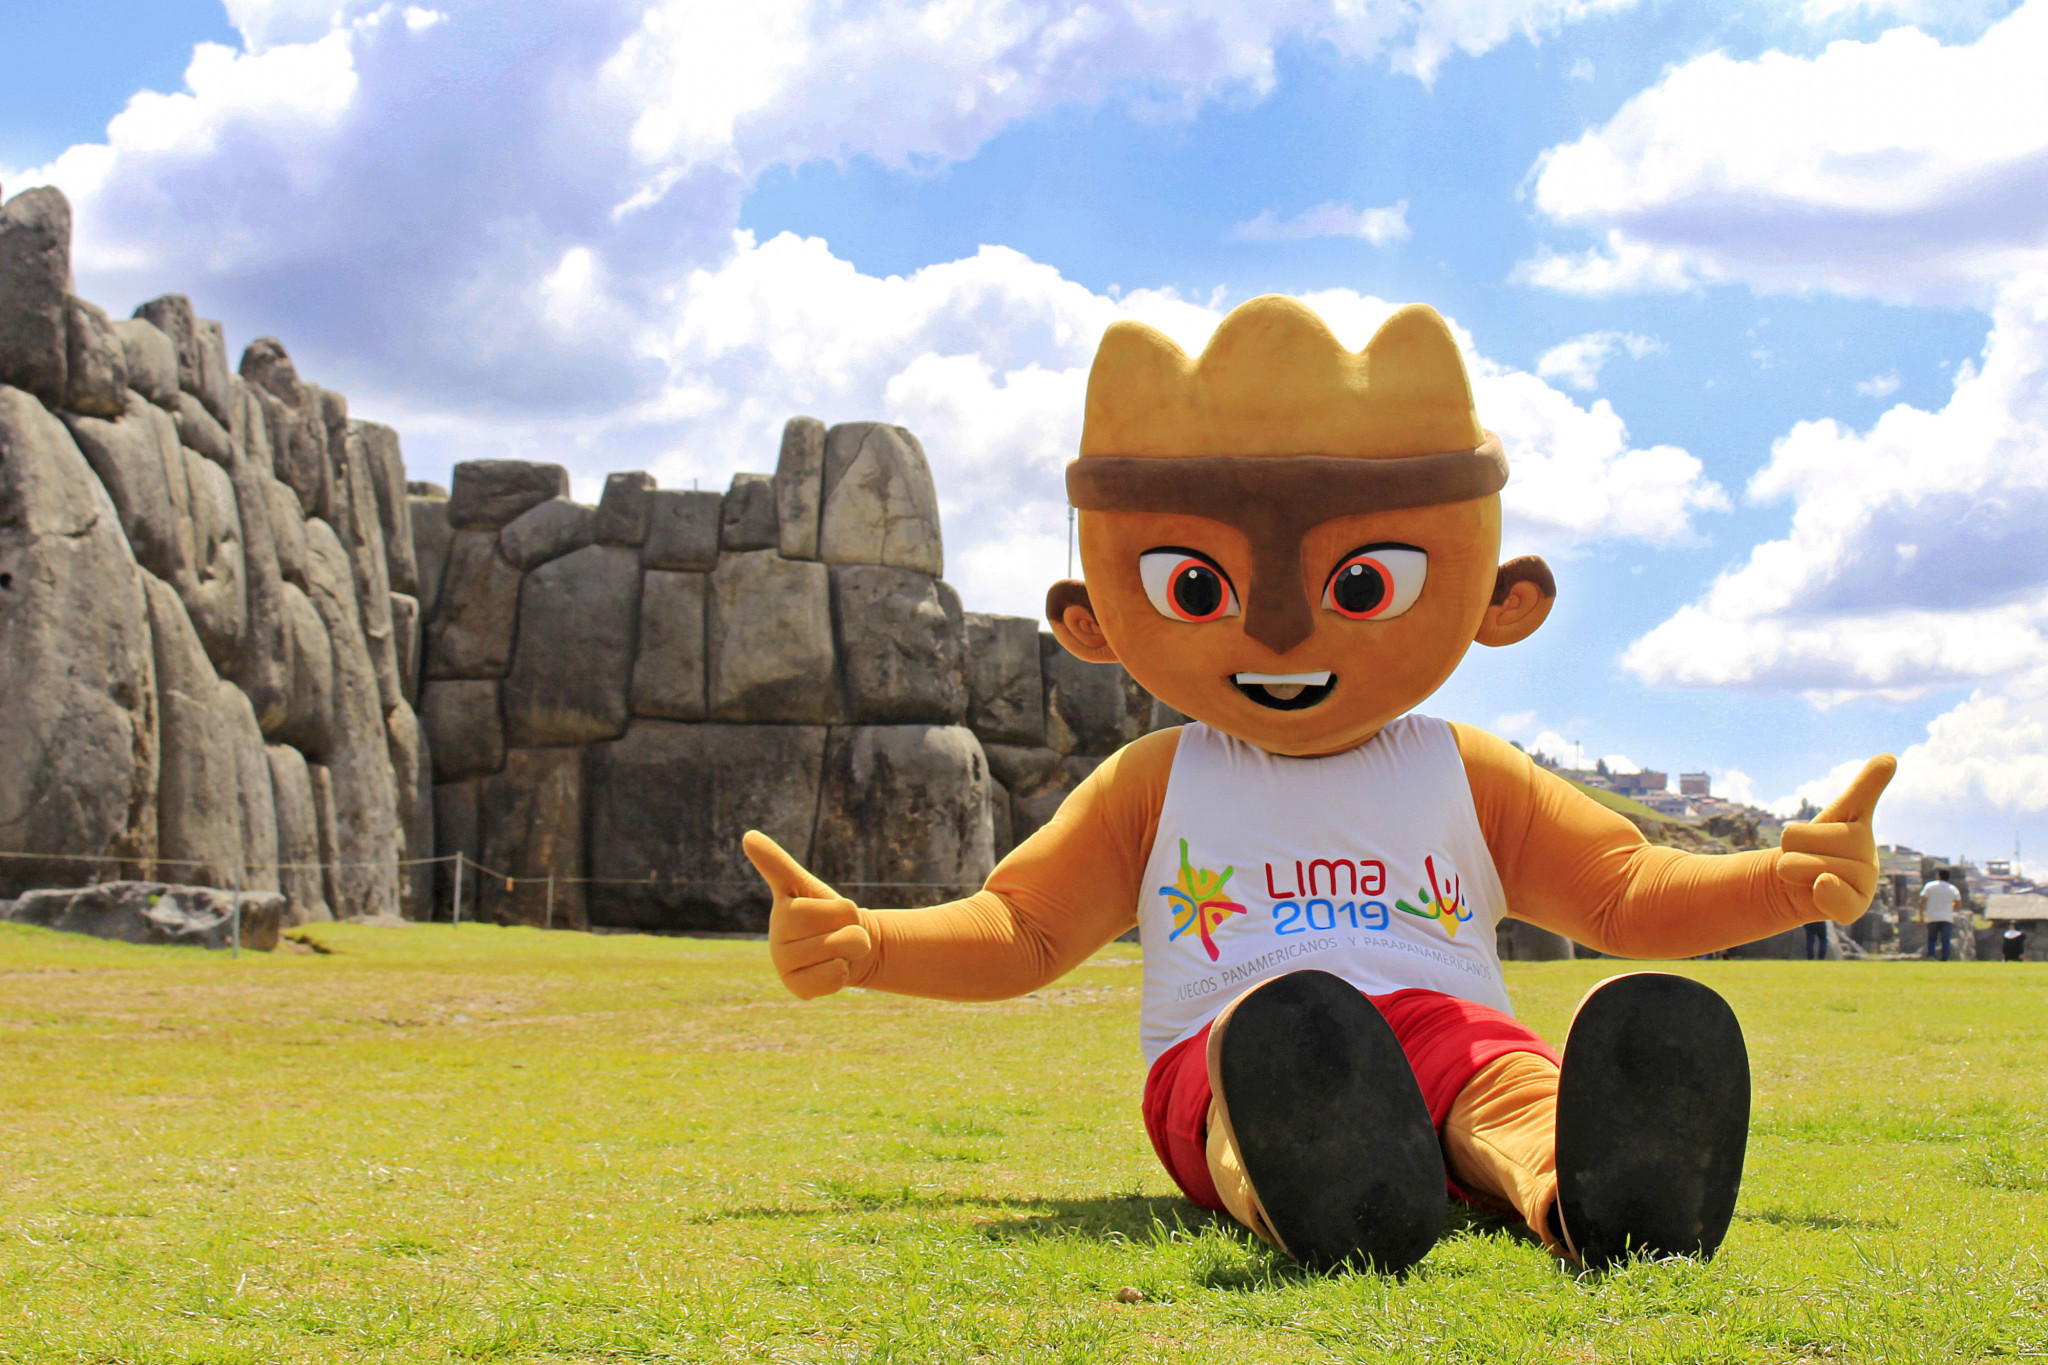 Lima 2019 mascot visits Cusco to spread enthusiasm for Pan American and Parapan American Games